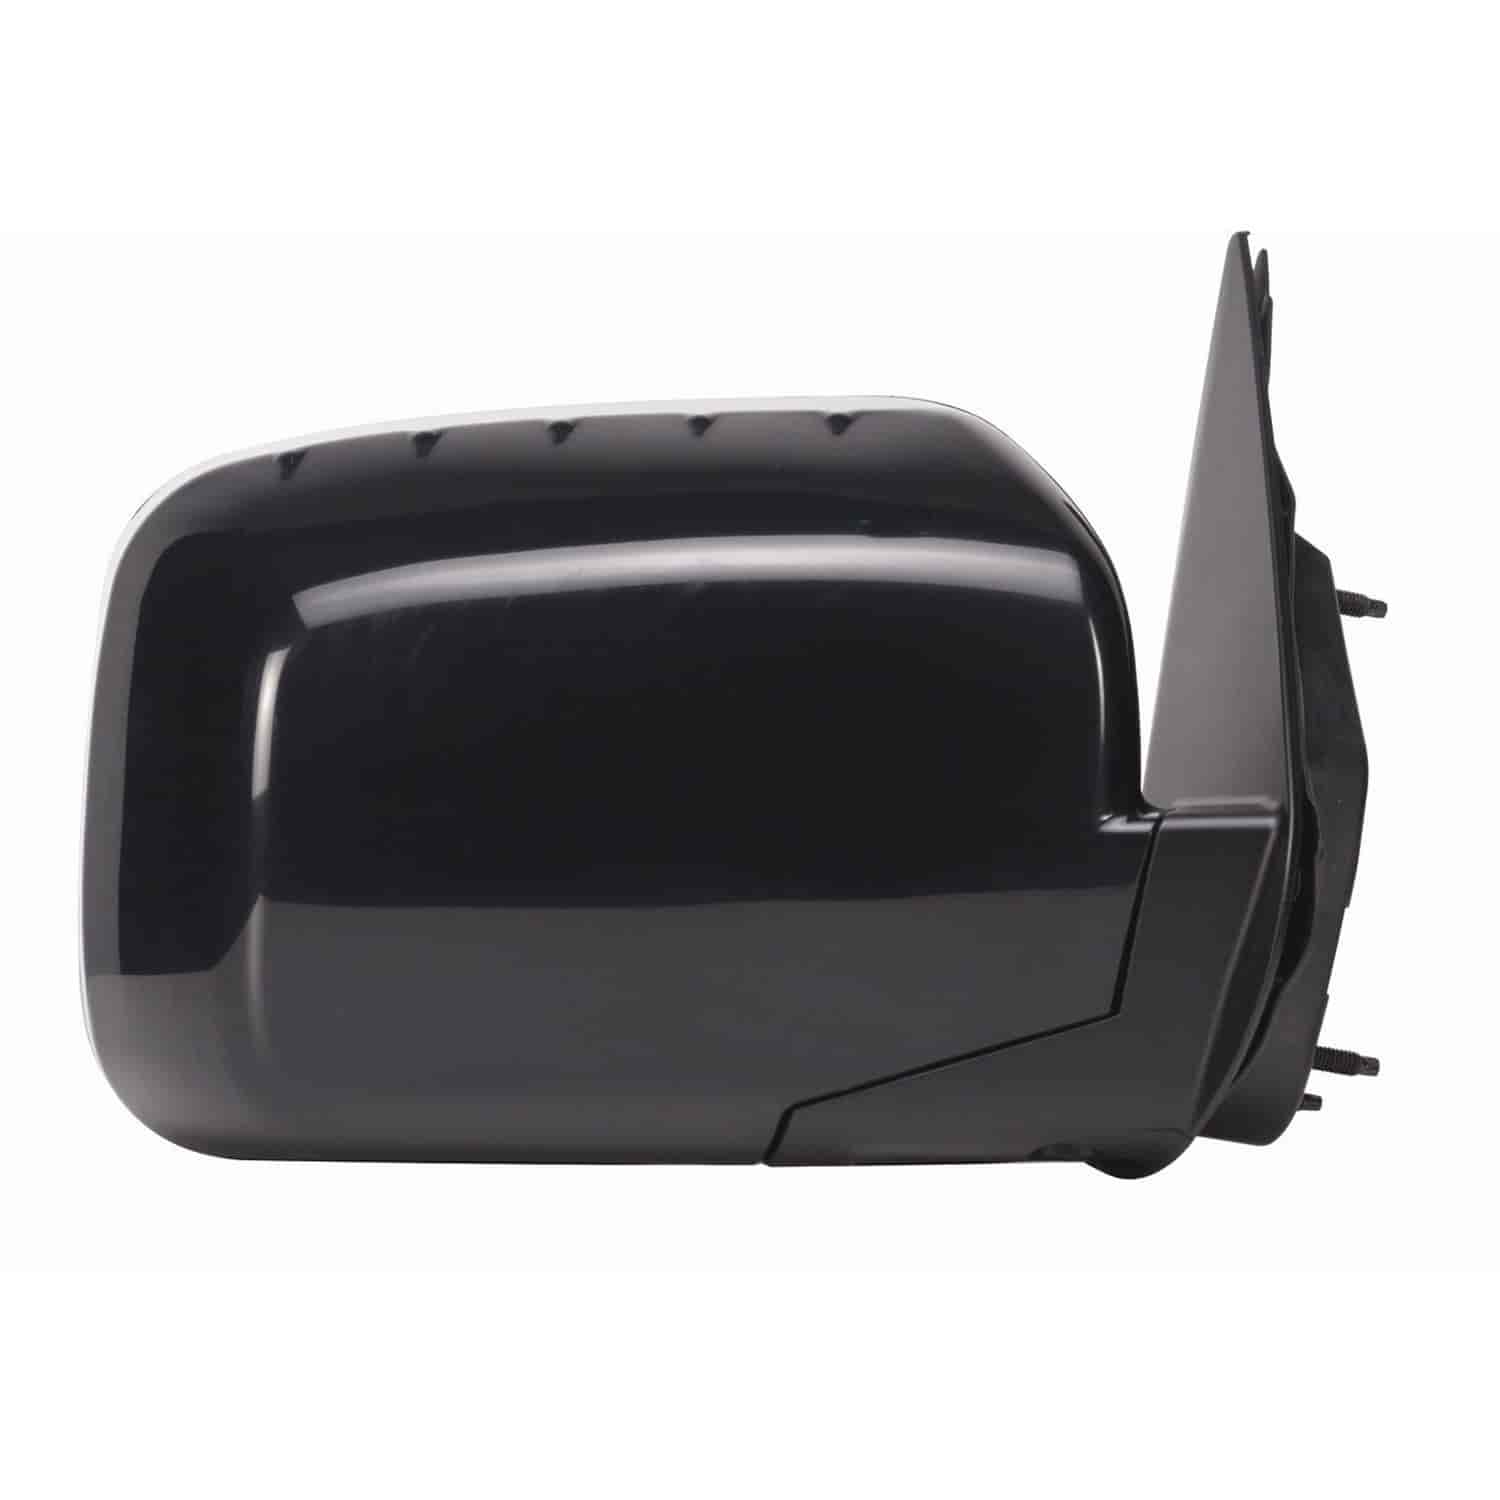 OEM Style Replacement mirror for 41804 Honda Ridgeline passenger side mirror tested to fit and funct